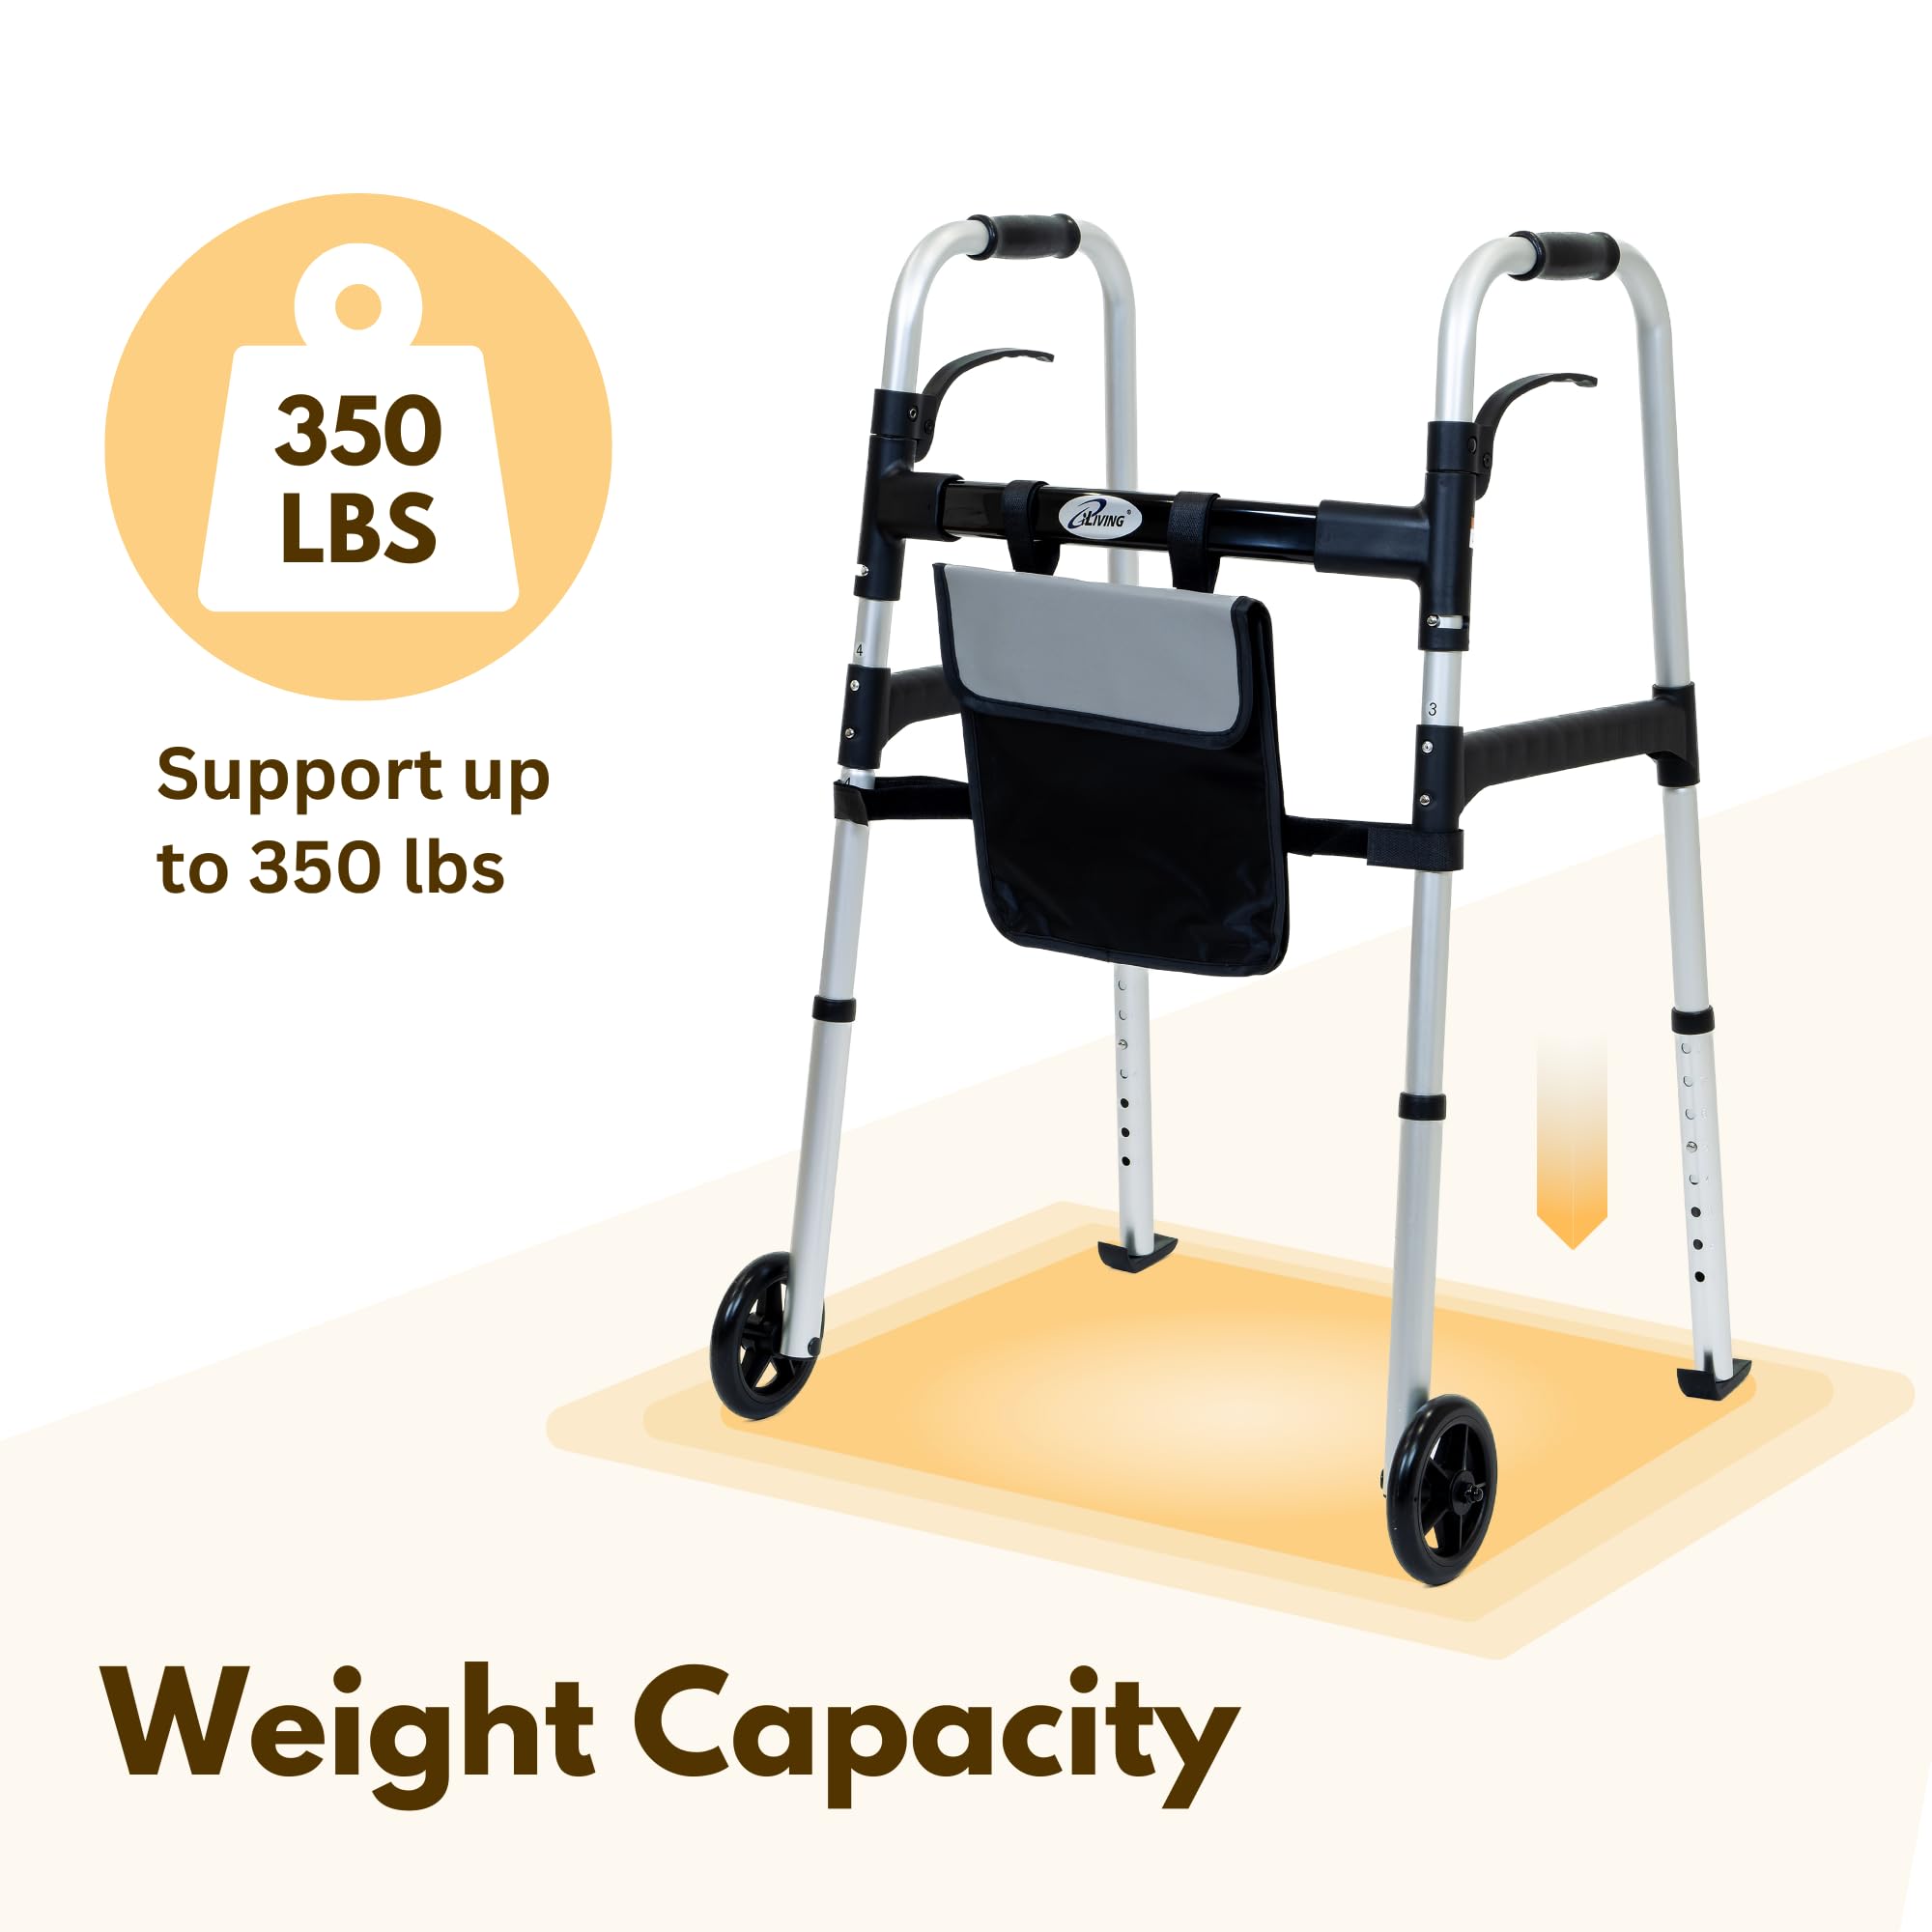 iLiving Easy Folding Rolling Walker with Shopping Bag Basket and Glide Skis - Upright Mobility Aid for Senior or Adults, Foldable and Adjustable Height Supports up to 350 lbs, Standard Walker, Silver